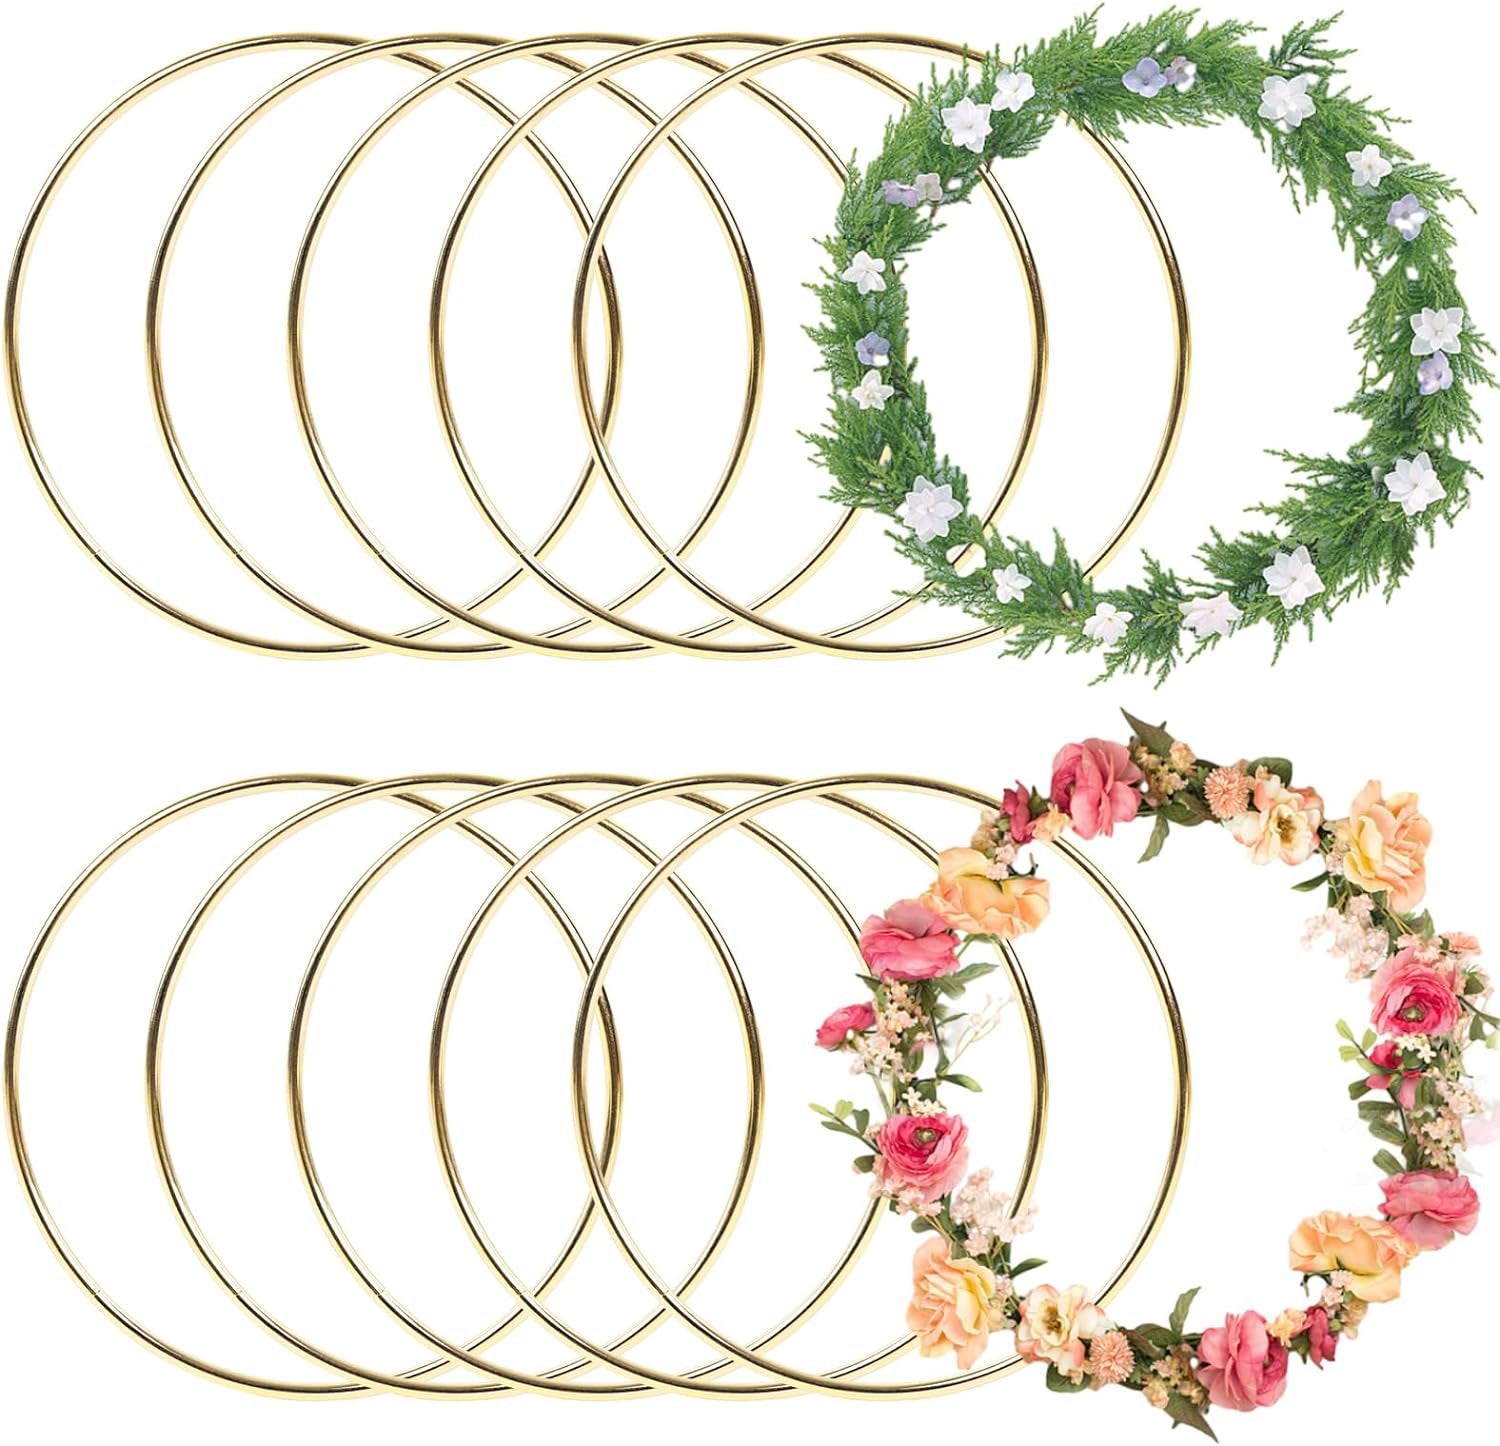 Dream Catcher Rings, 10PCS Wreath Macrame Rings Gold Metal Floral Hoops for Making Wedding Wreath Decor Wall Hanging Crafts, 5 Sizes